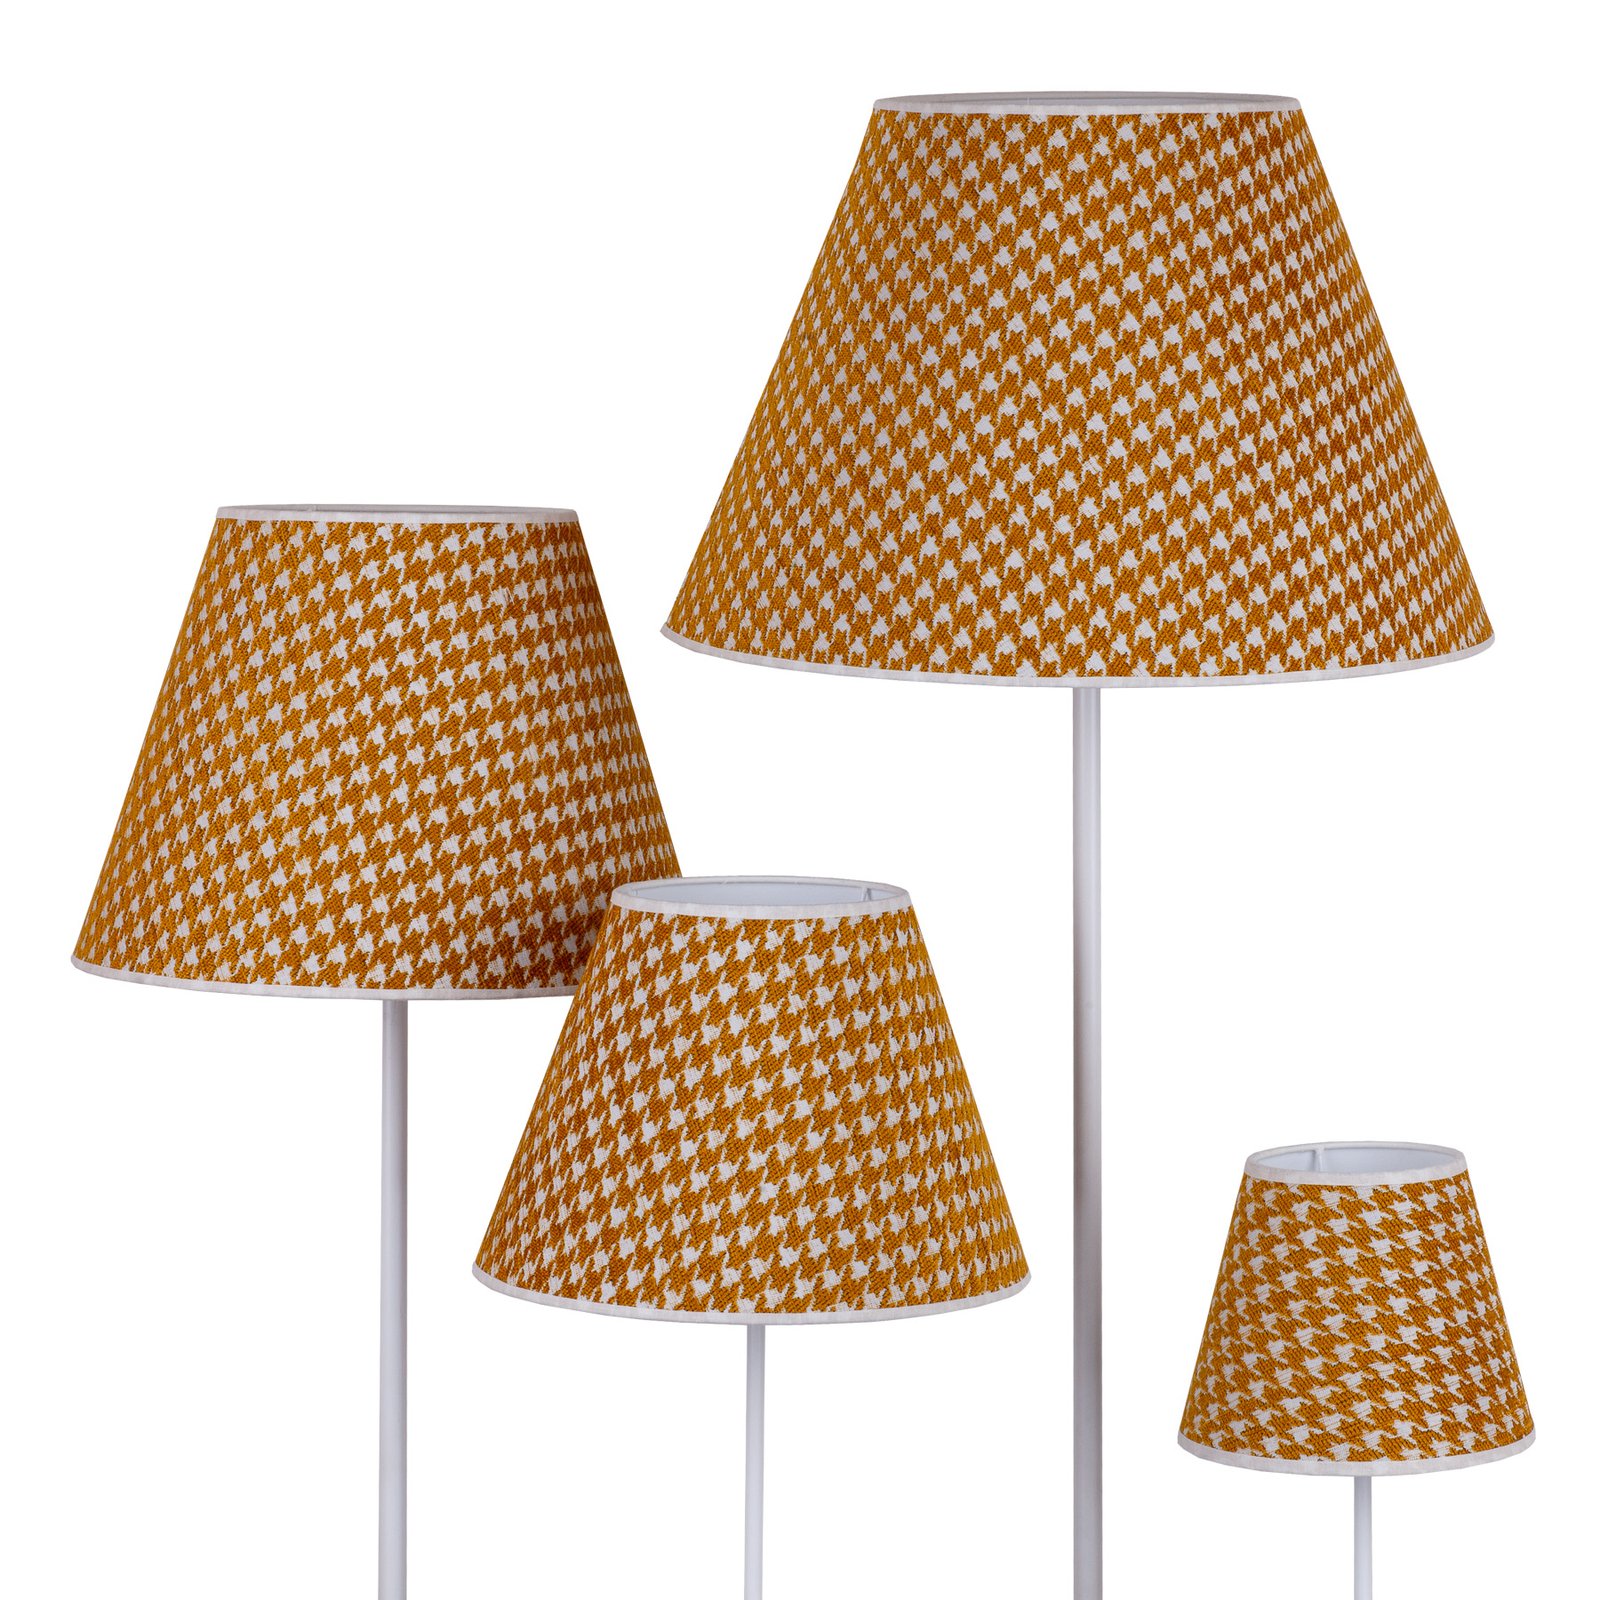 Sofia lampshade 31 cm, houndstooth pattern yellow